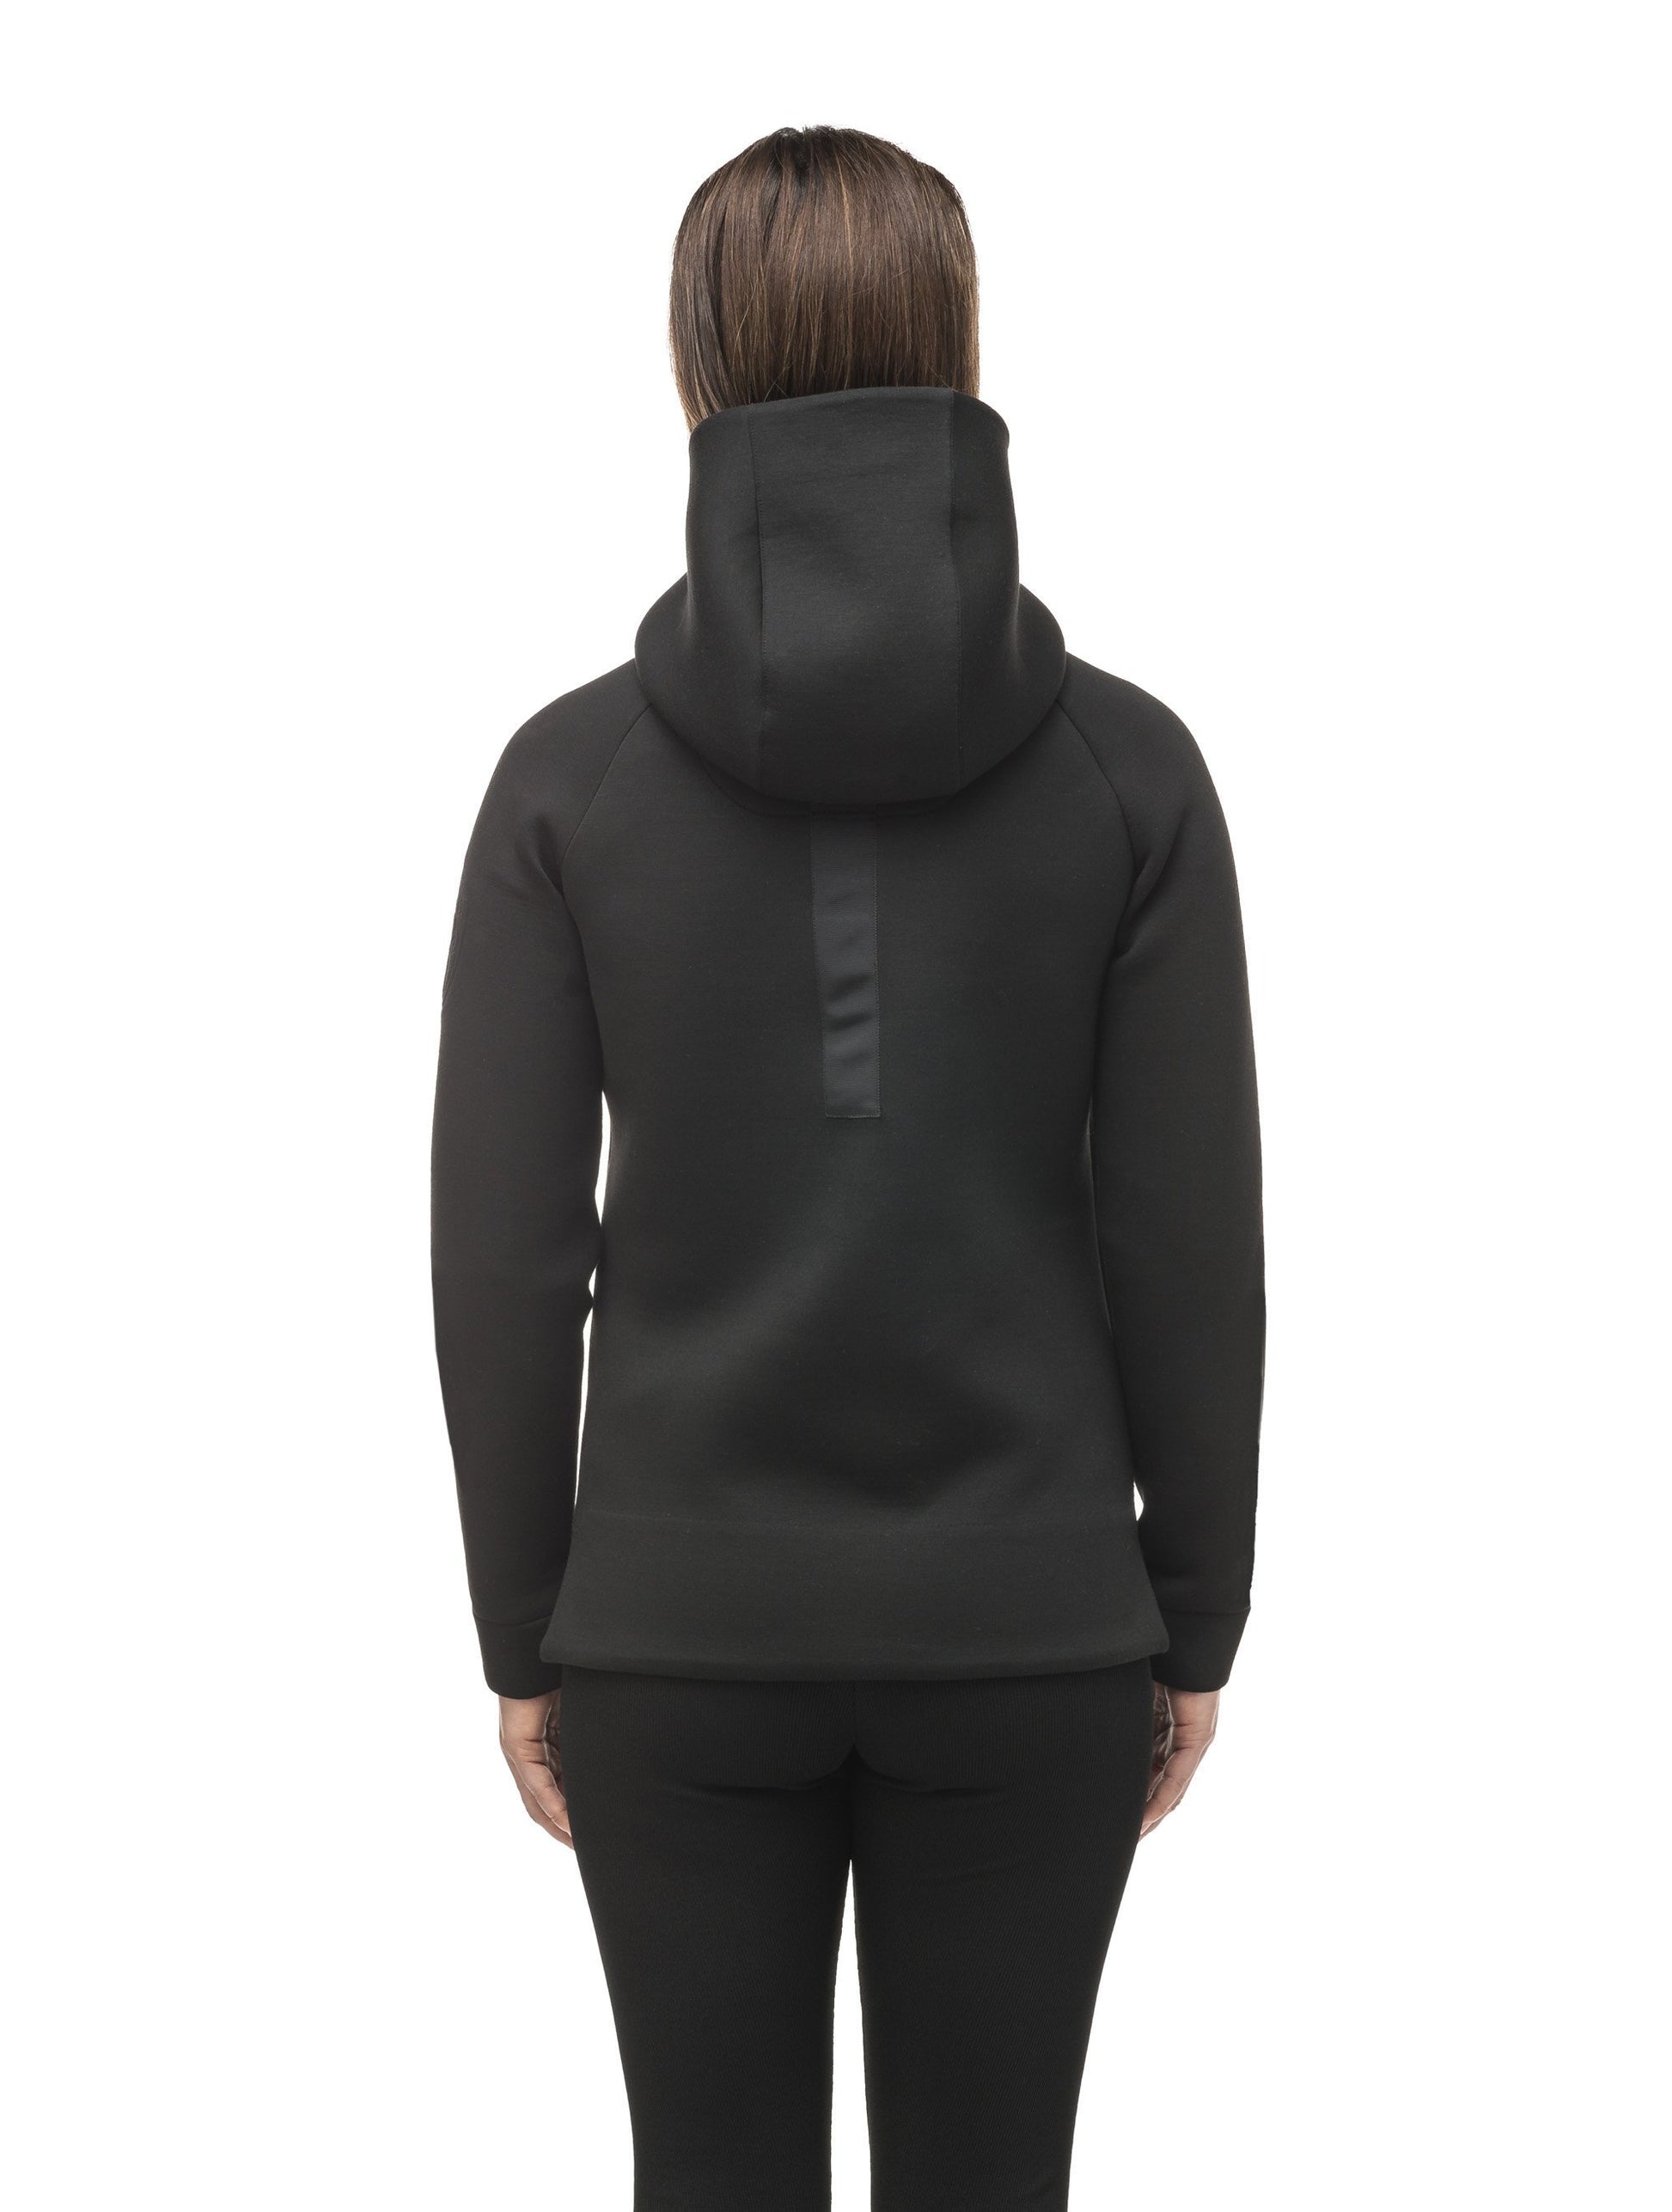 Structured women's hoodie with exposed zipper in Black